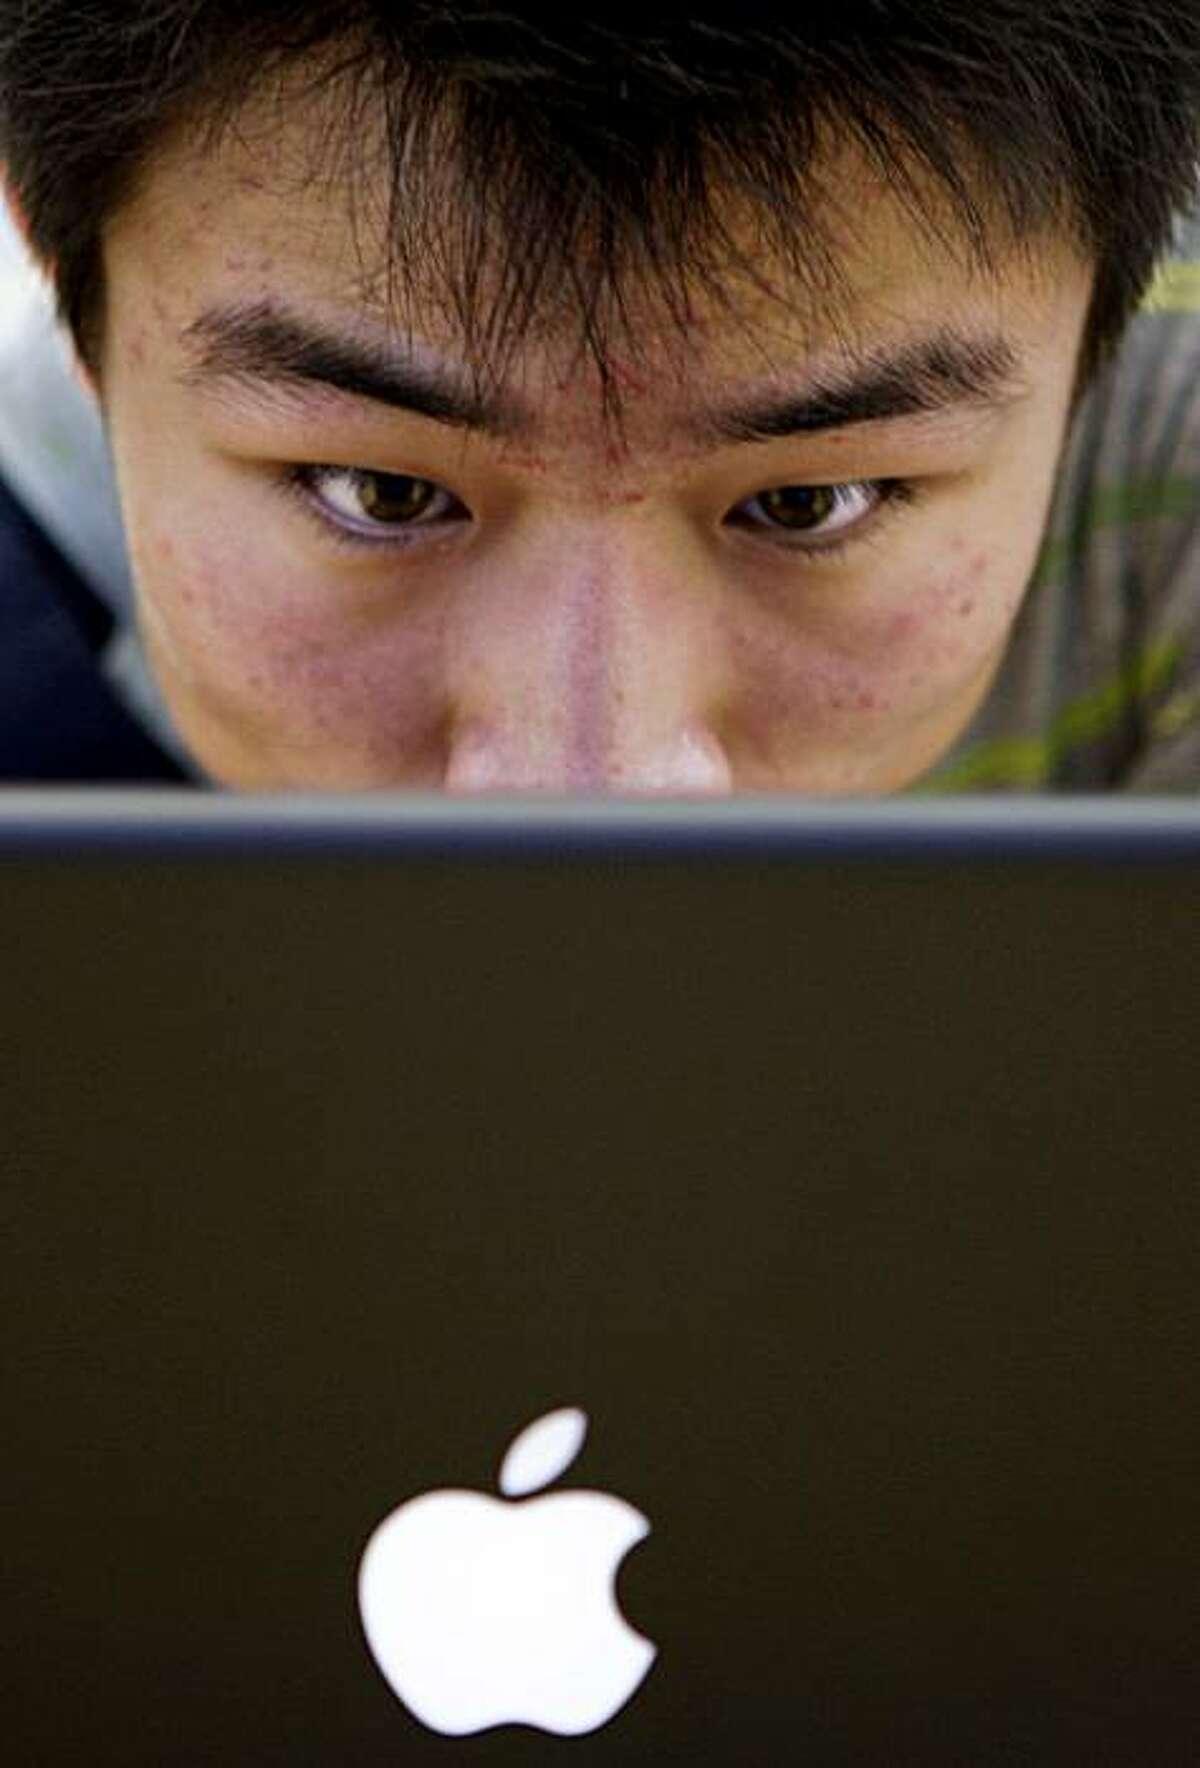 ** FILE ** In this July 19, 2008 file photo, a customer looks at a computer in Beijing's newly-opened Apple computer store. Customers in China of Apple Inc.'s iTunes online music store were unable to download songs since Monday, Aug. 18, 2008 and an activist group said Beijing was trying to block access to a new Tibet-themed album. (AP Photo/Oded Balilty, File)